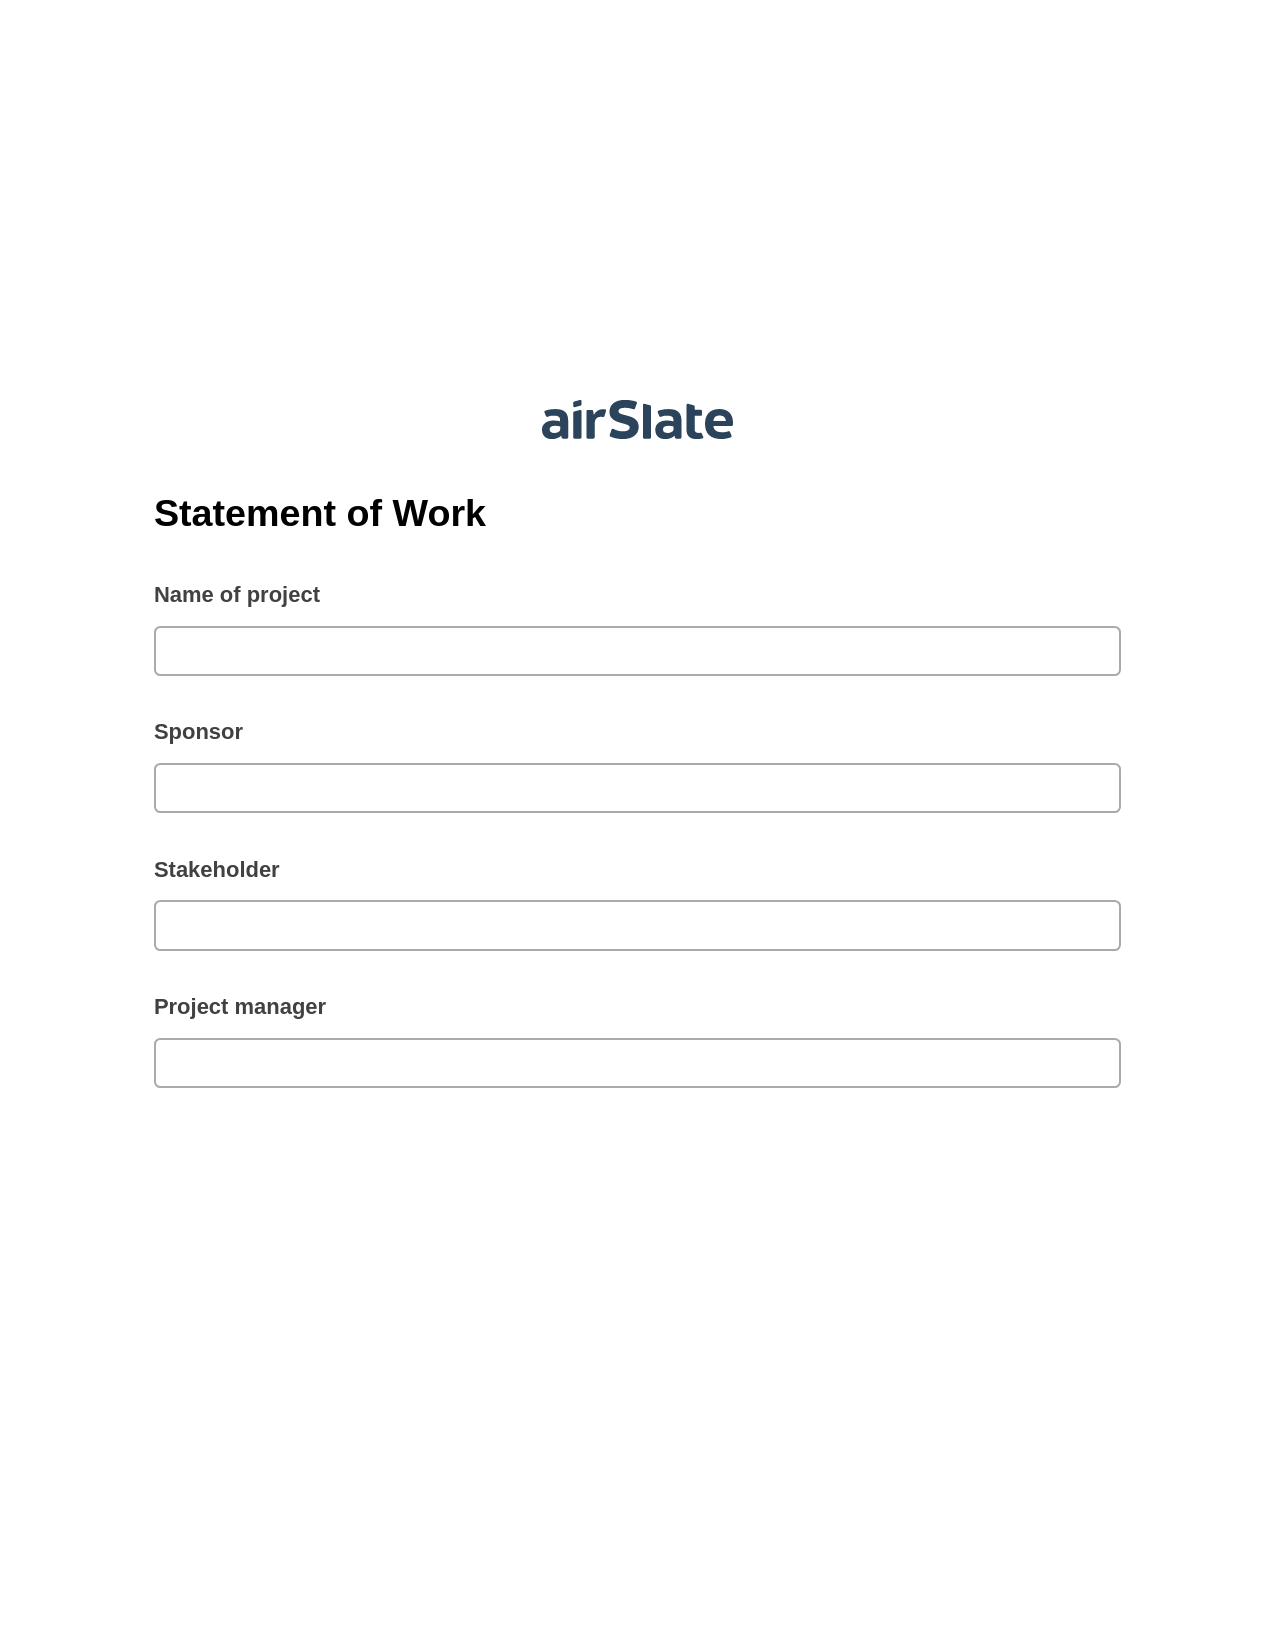 Statement of Work Pre-fill from Google Sheet Dropdown Options Bot, Create slate in another Flow Bot DEPRECATED, Export to Salesforce Bot